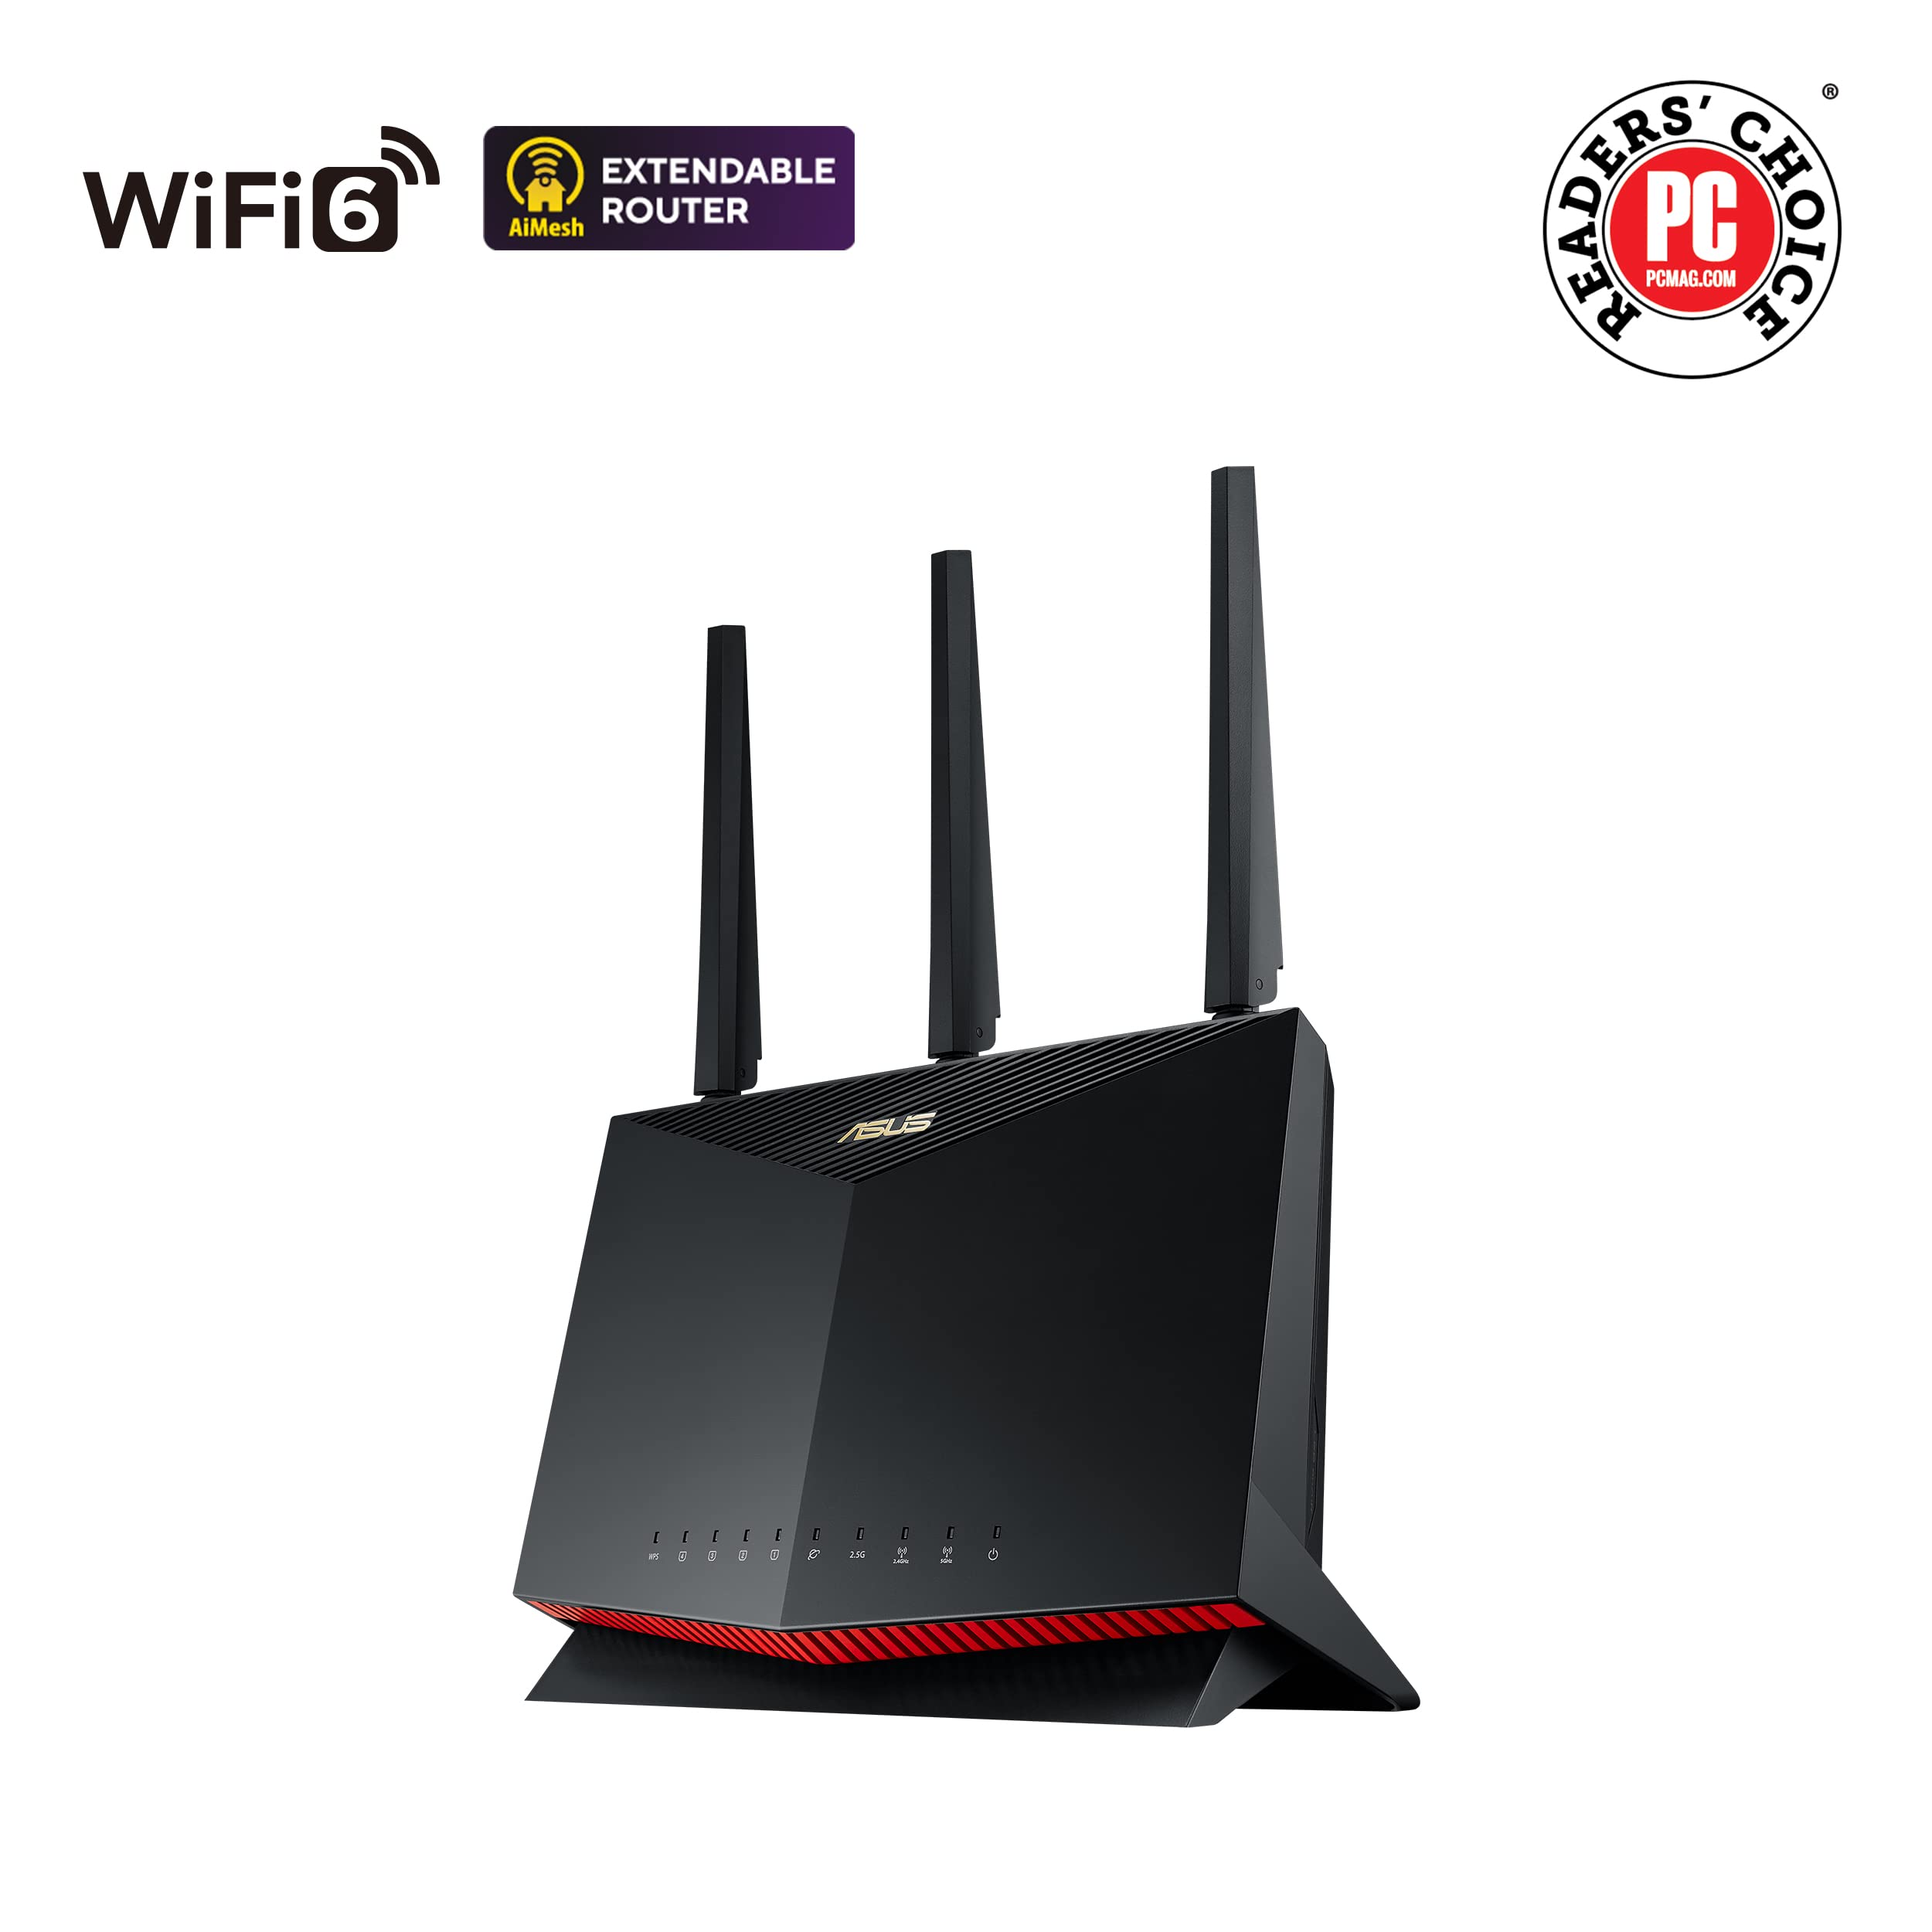 ASUS RT-AX86U (AX5700) Dual Band WiFi 6 Extendable Gaming Router, 2.5G Port, Gaming Port, Mobile Game Mode, Port Forwarding, Subscription-free Network Security, Instant Guard, VPN, AiMesh Compatible